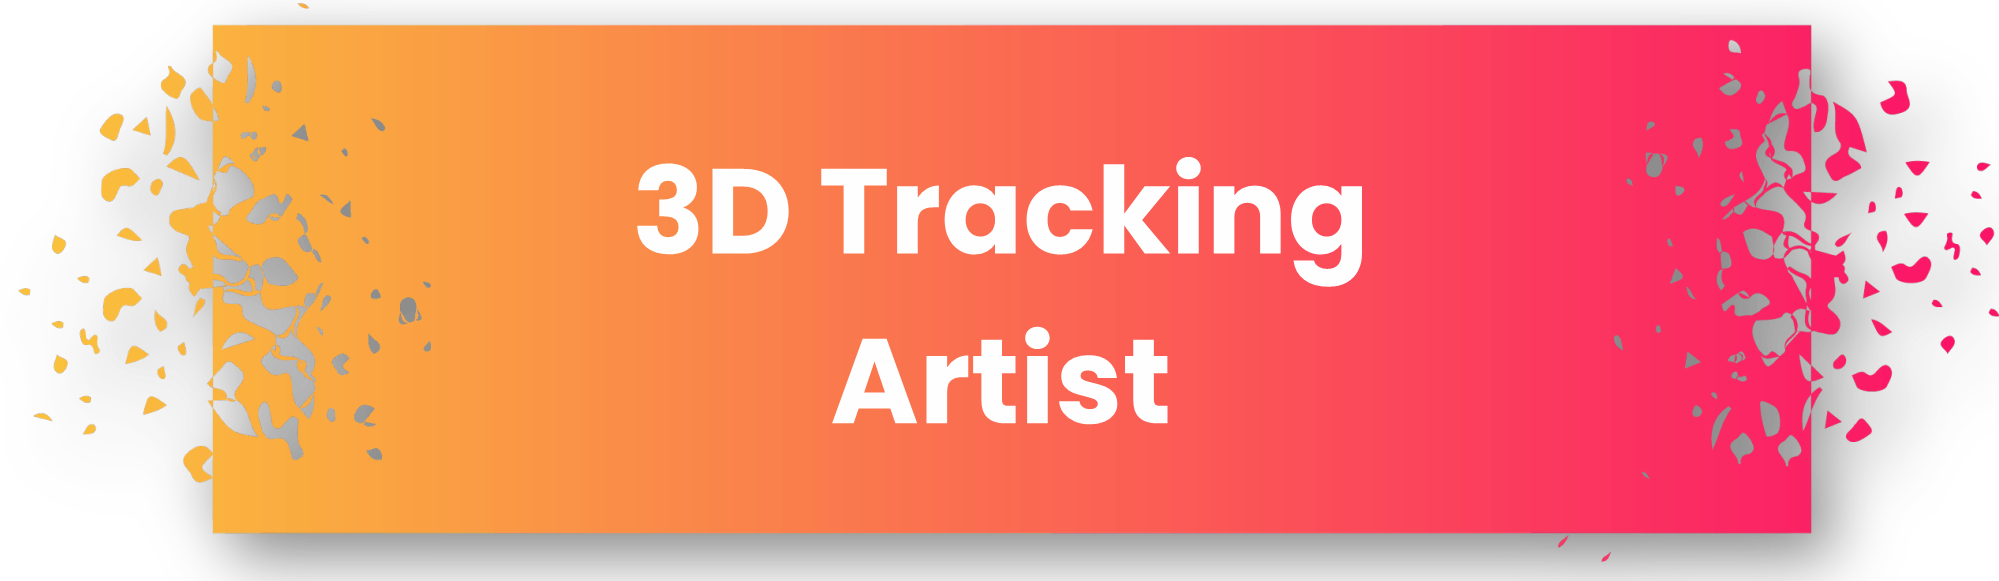 3D Tracking